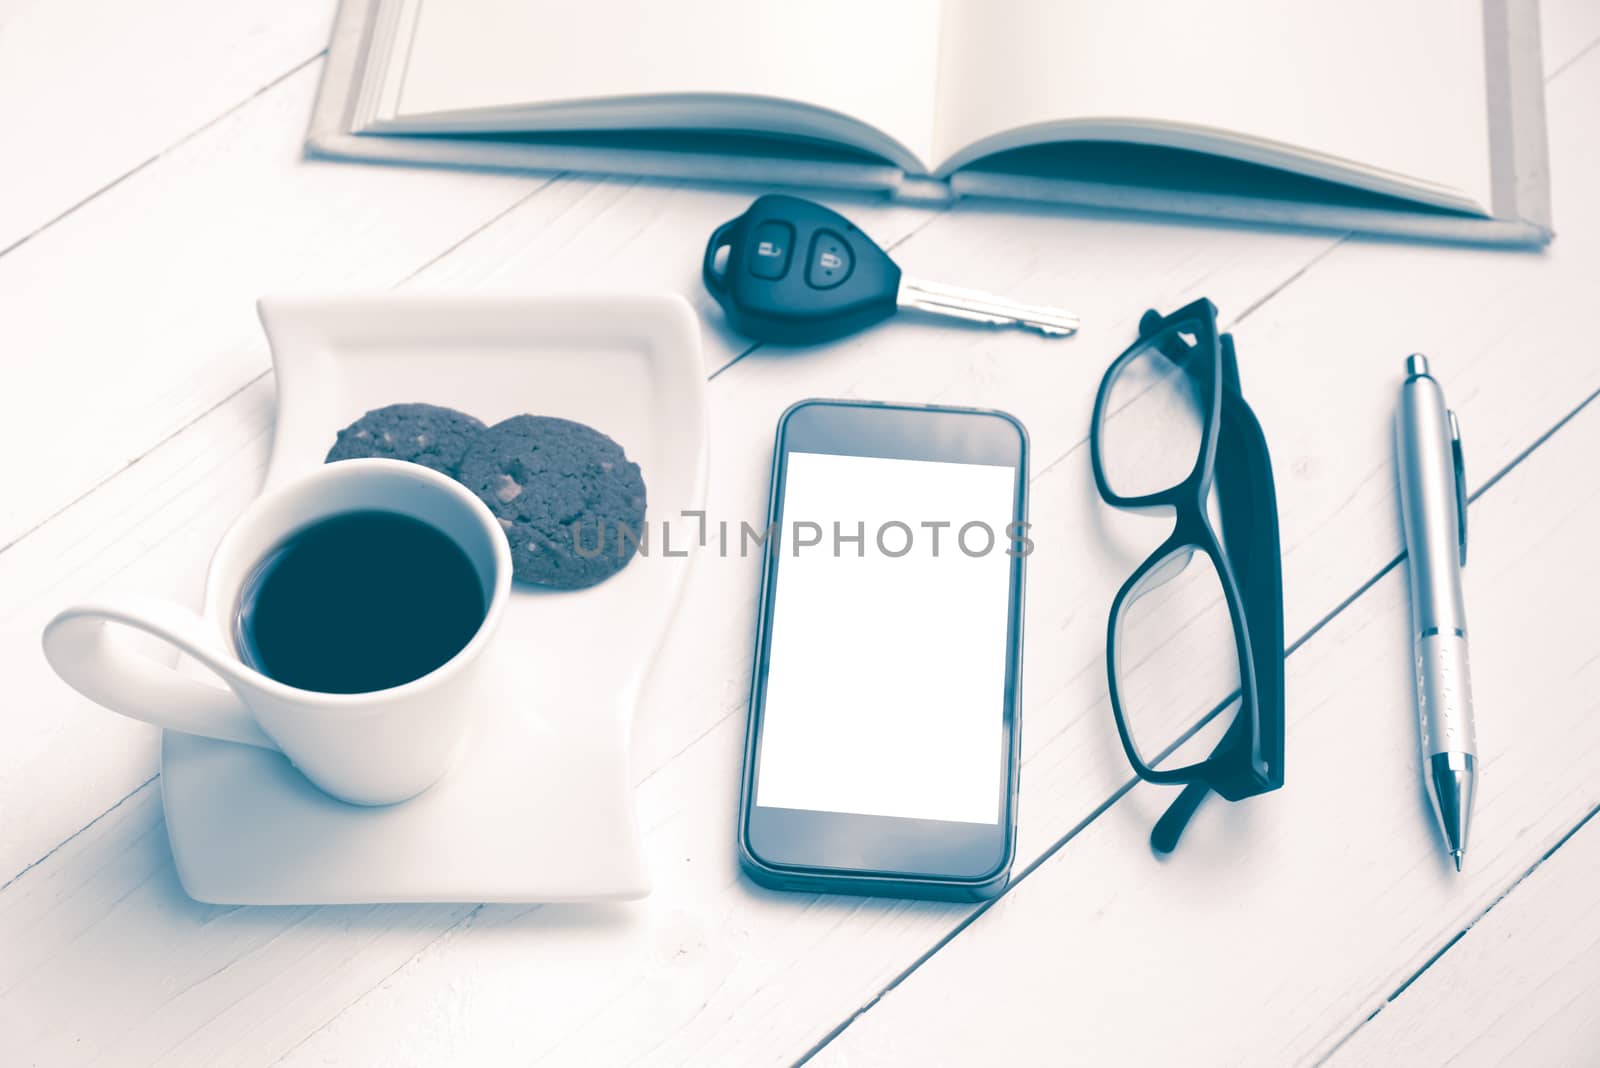 coffee cup with cookie,phone,open notebook,car key and eyeglasses on white wood table vintage style